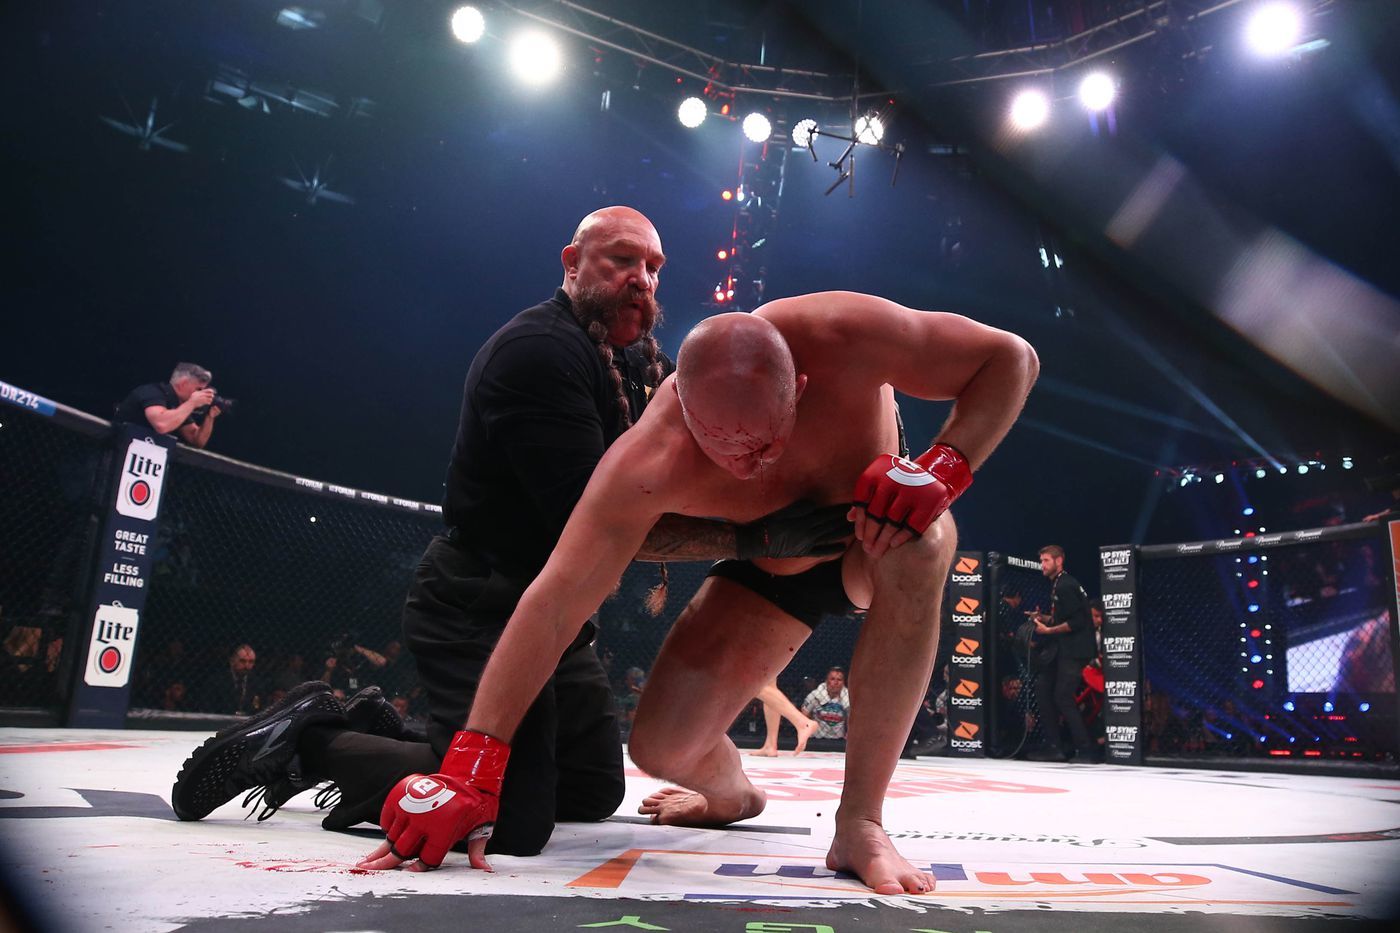 Fedor finds himself drowsed